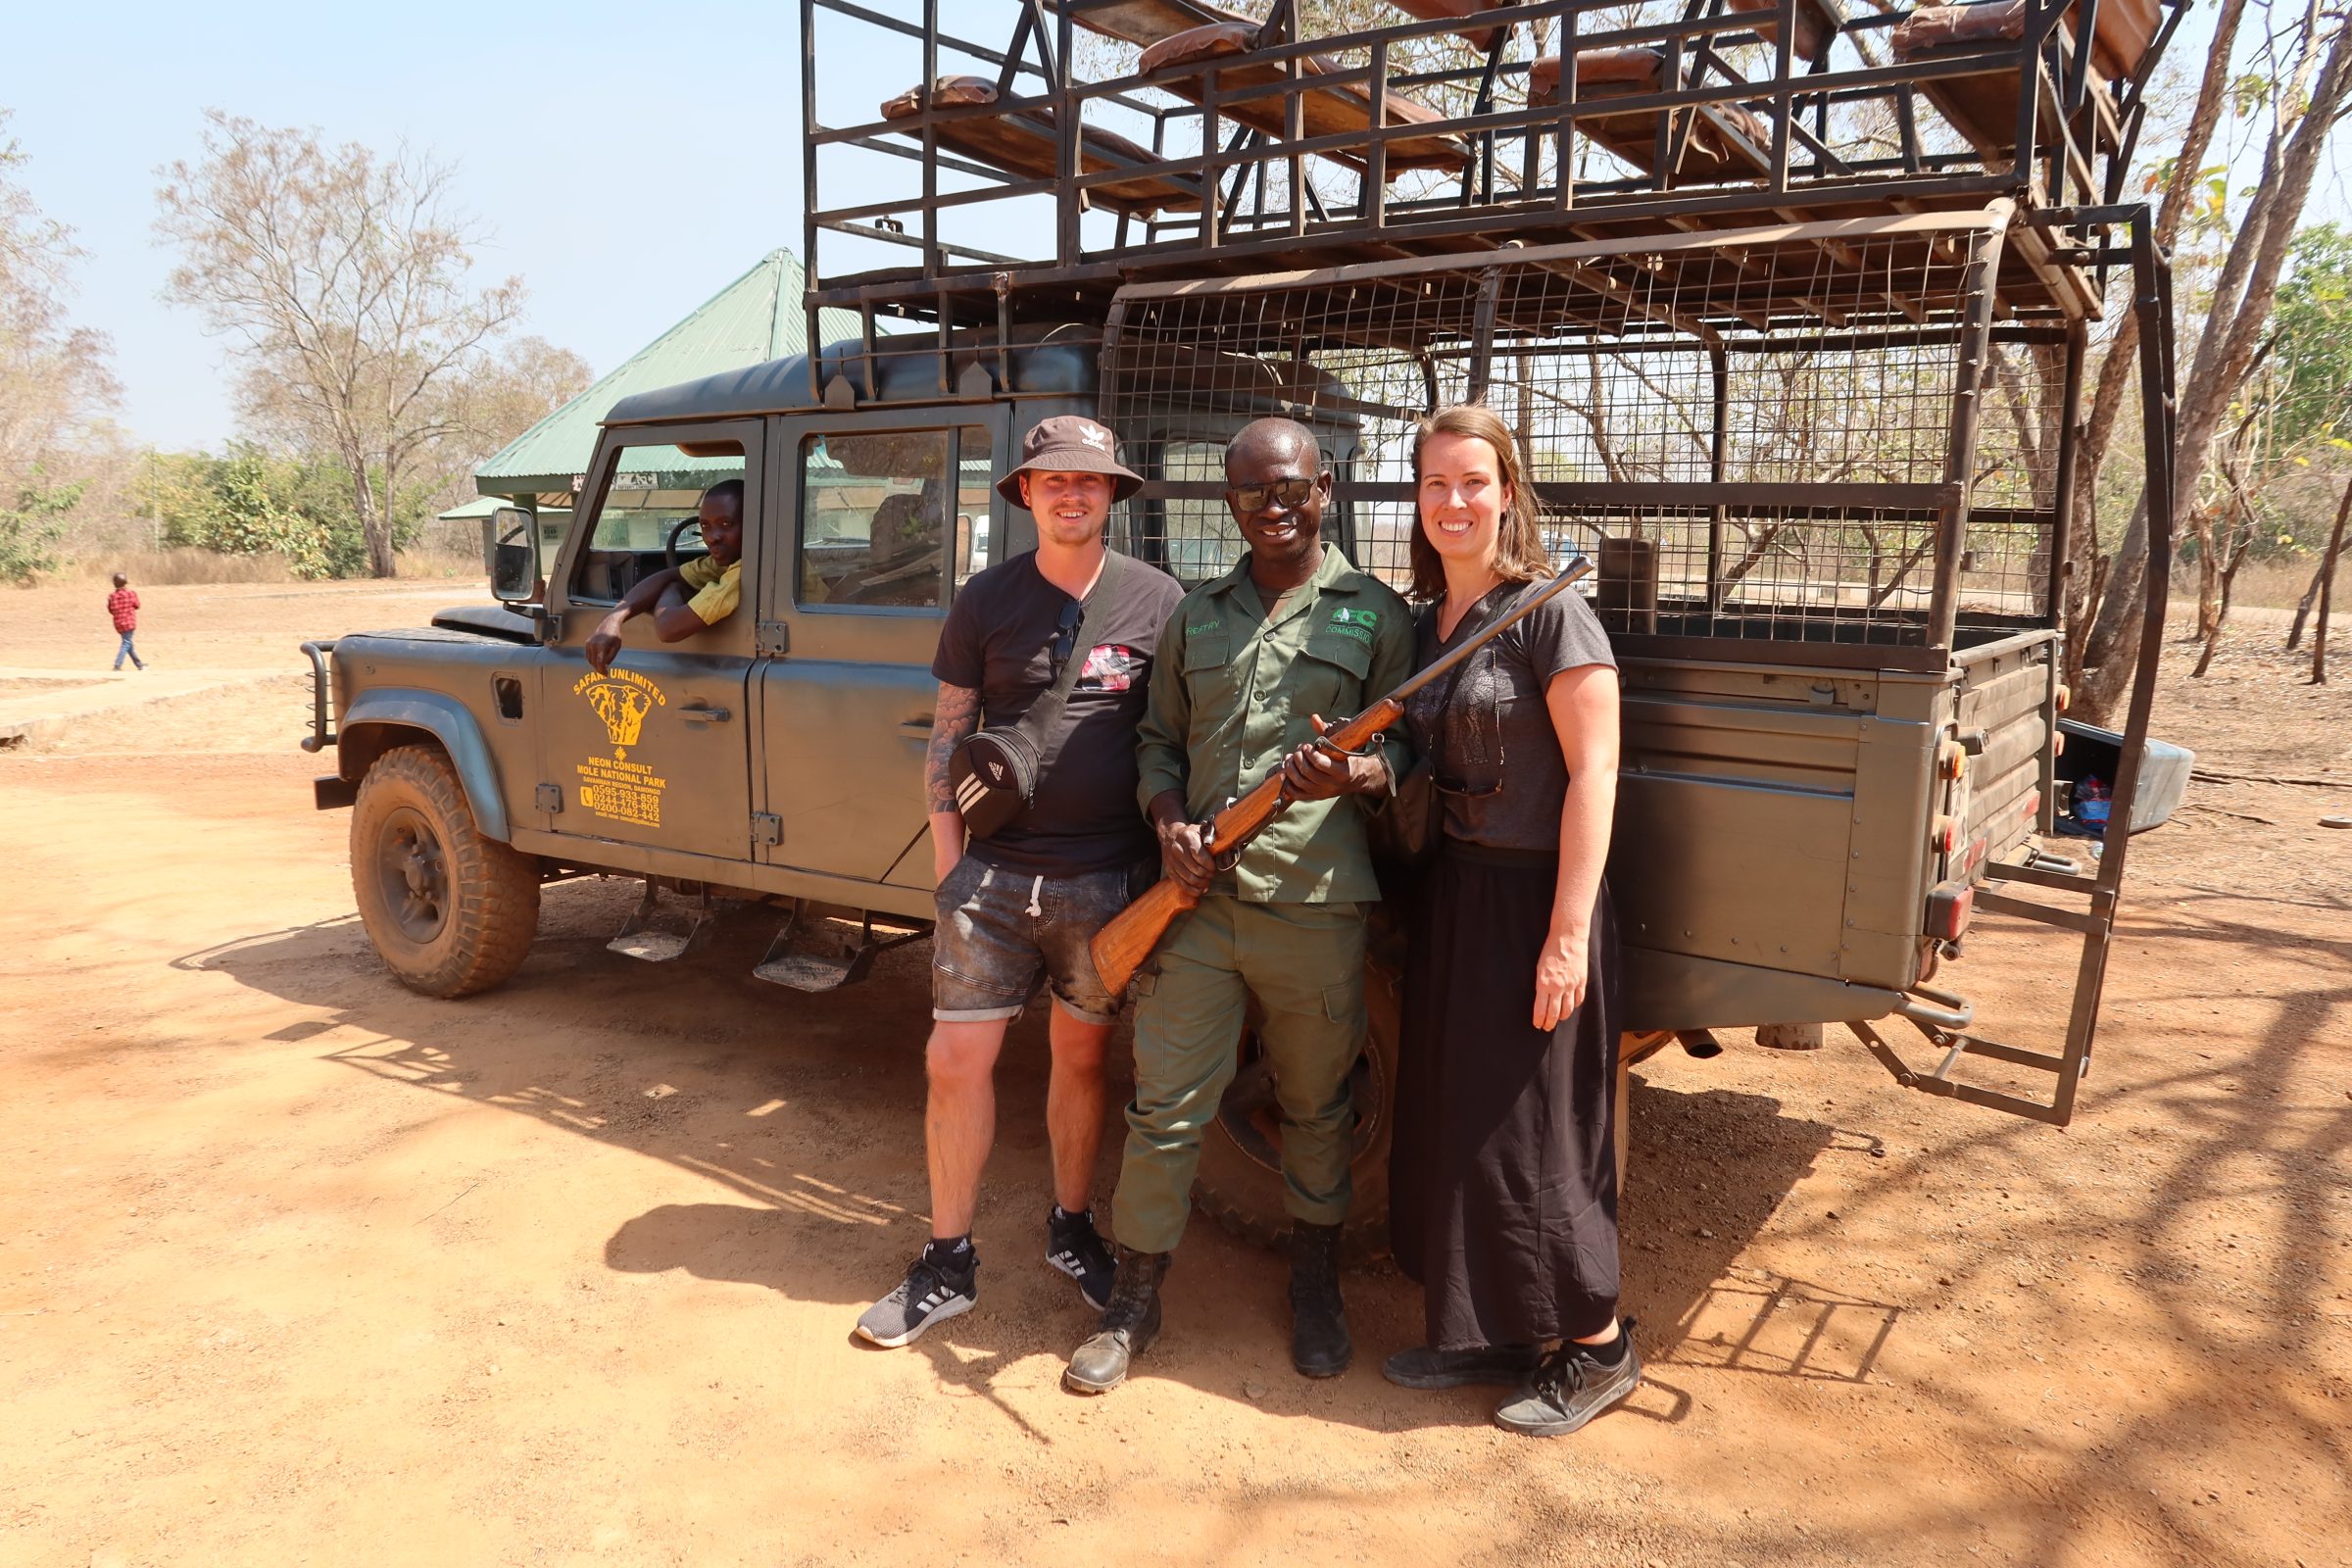 The Jeep and Ranger in the Mole National Park, Ghana.